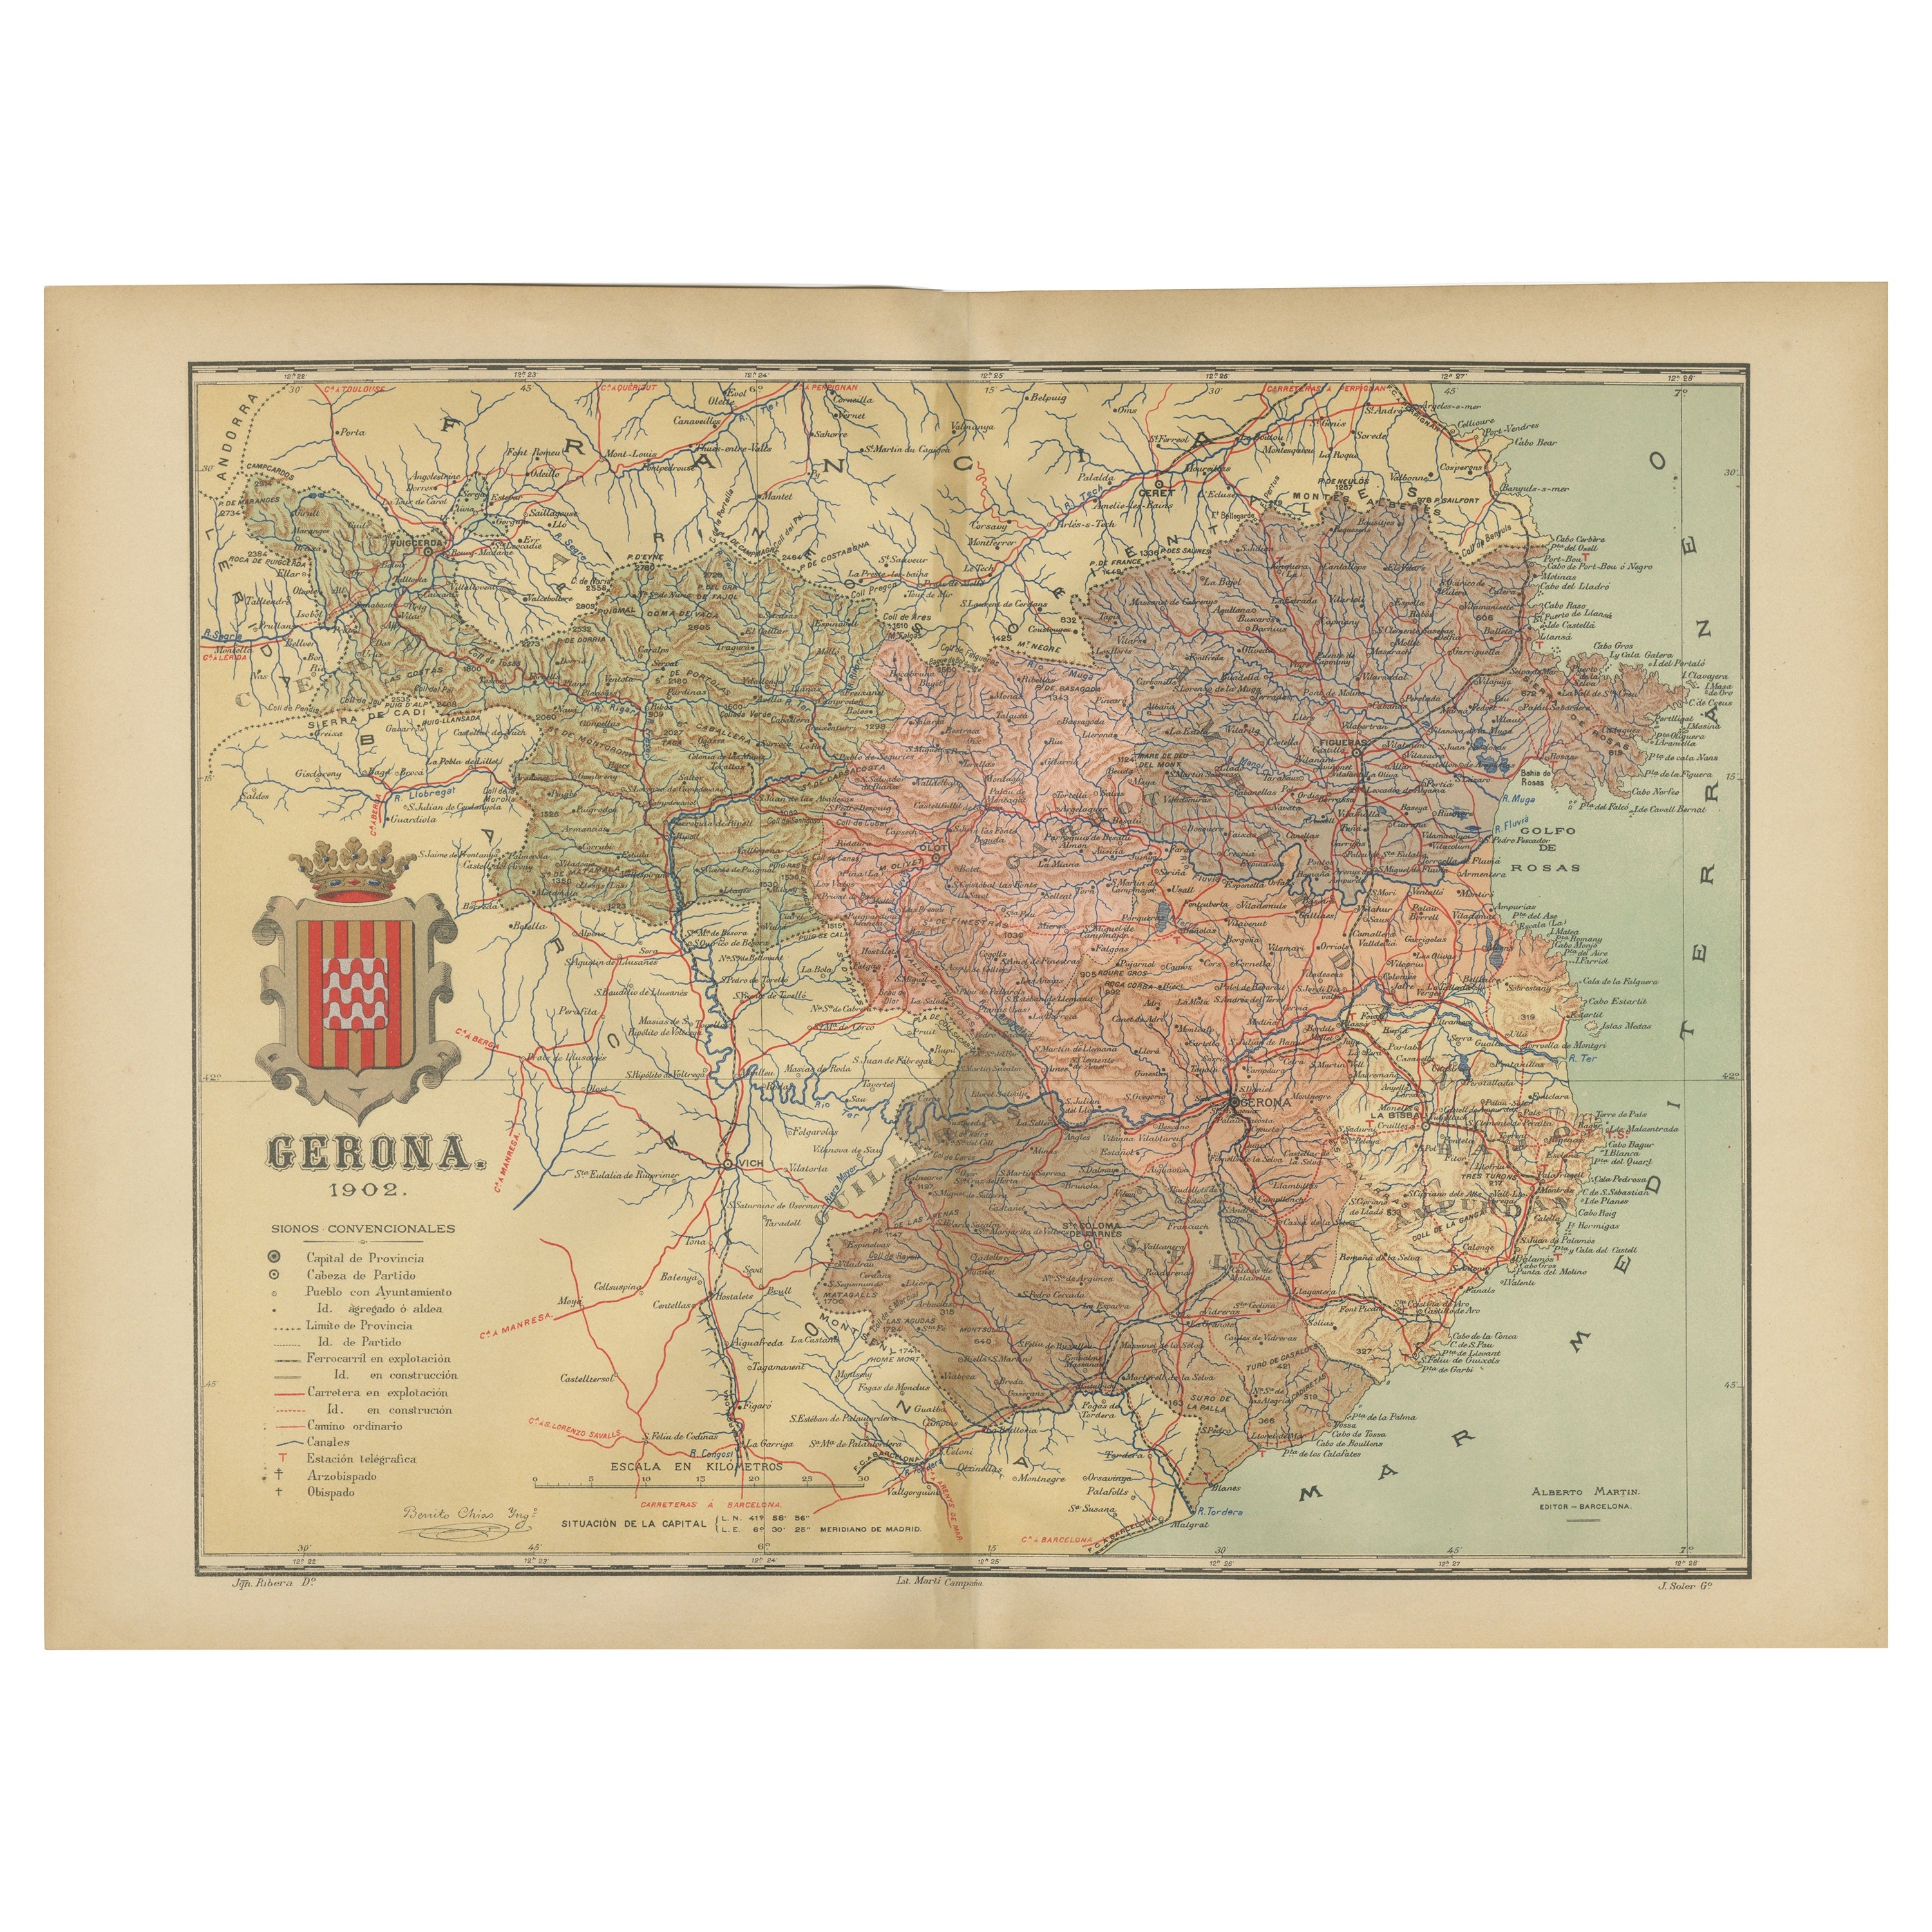 Girona 1902: Geographic and Infrastructural Map of Catalonia’s Northern Province